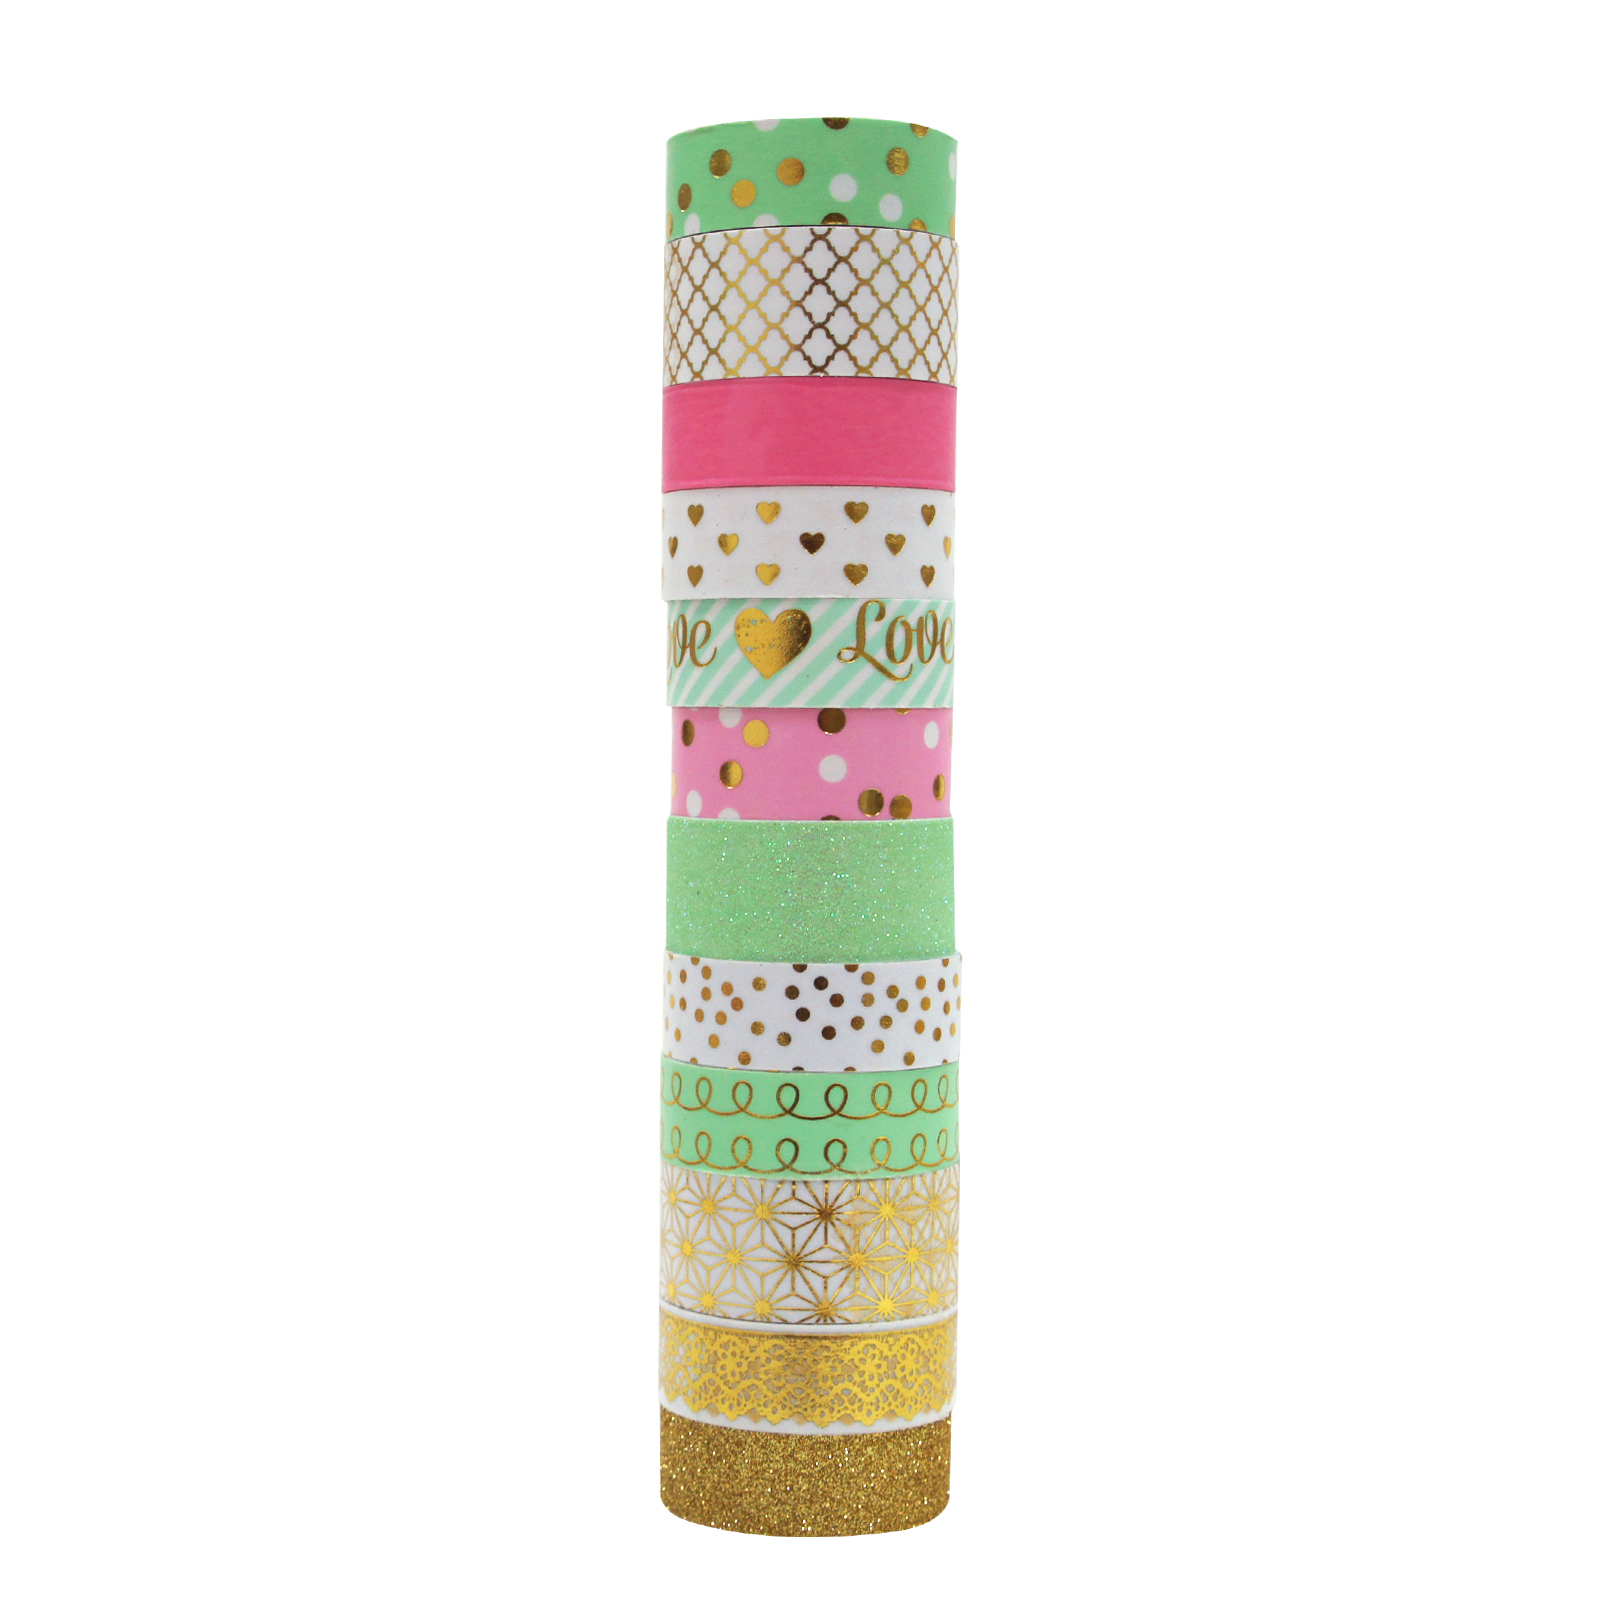 http://www.michaels.com/blush-washi-tape-tube-by-recollections/10464889.html#q=recollections+washi&start=2